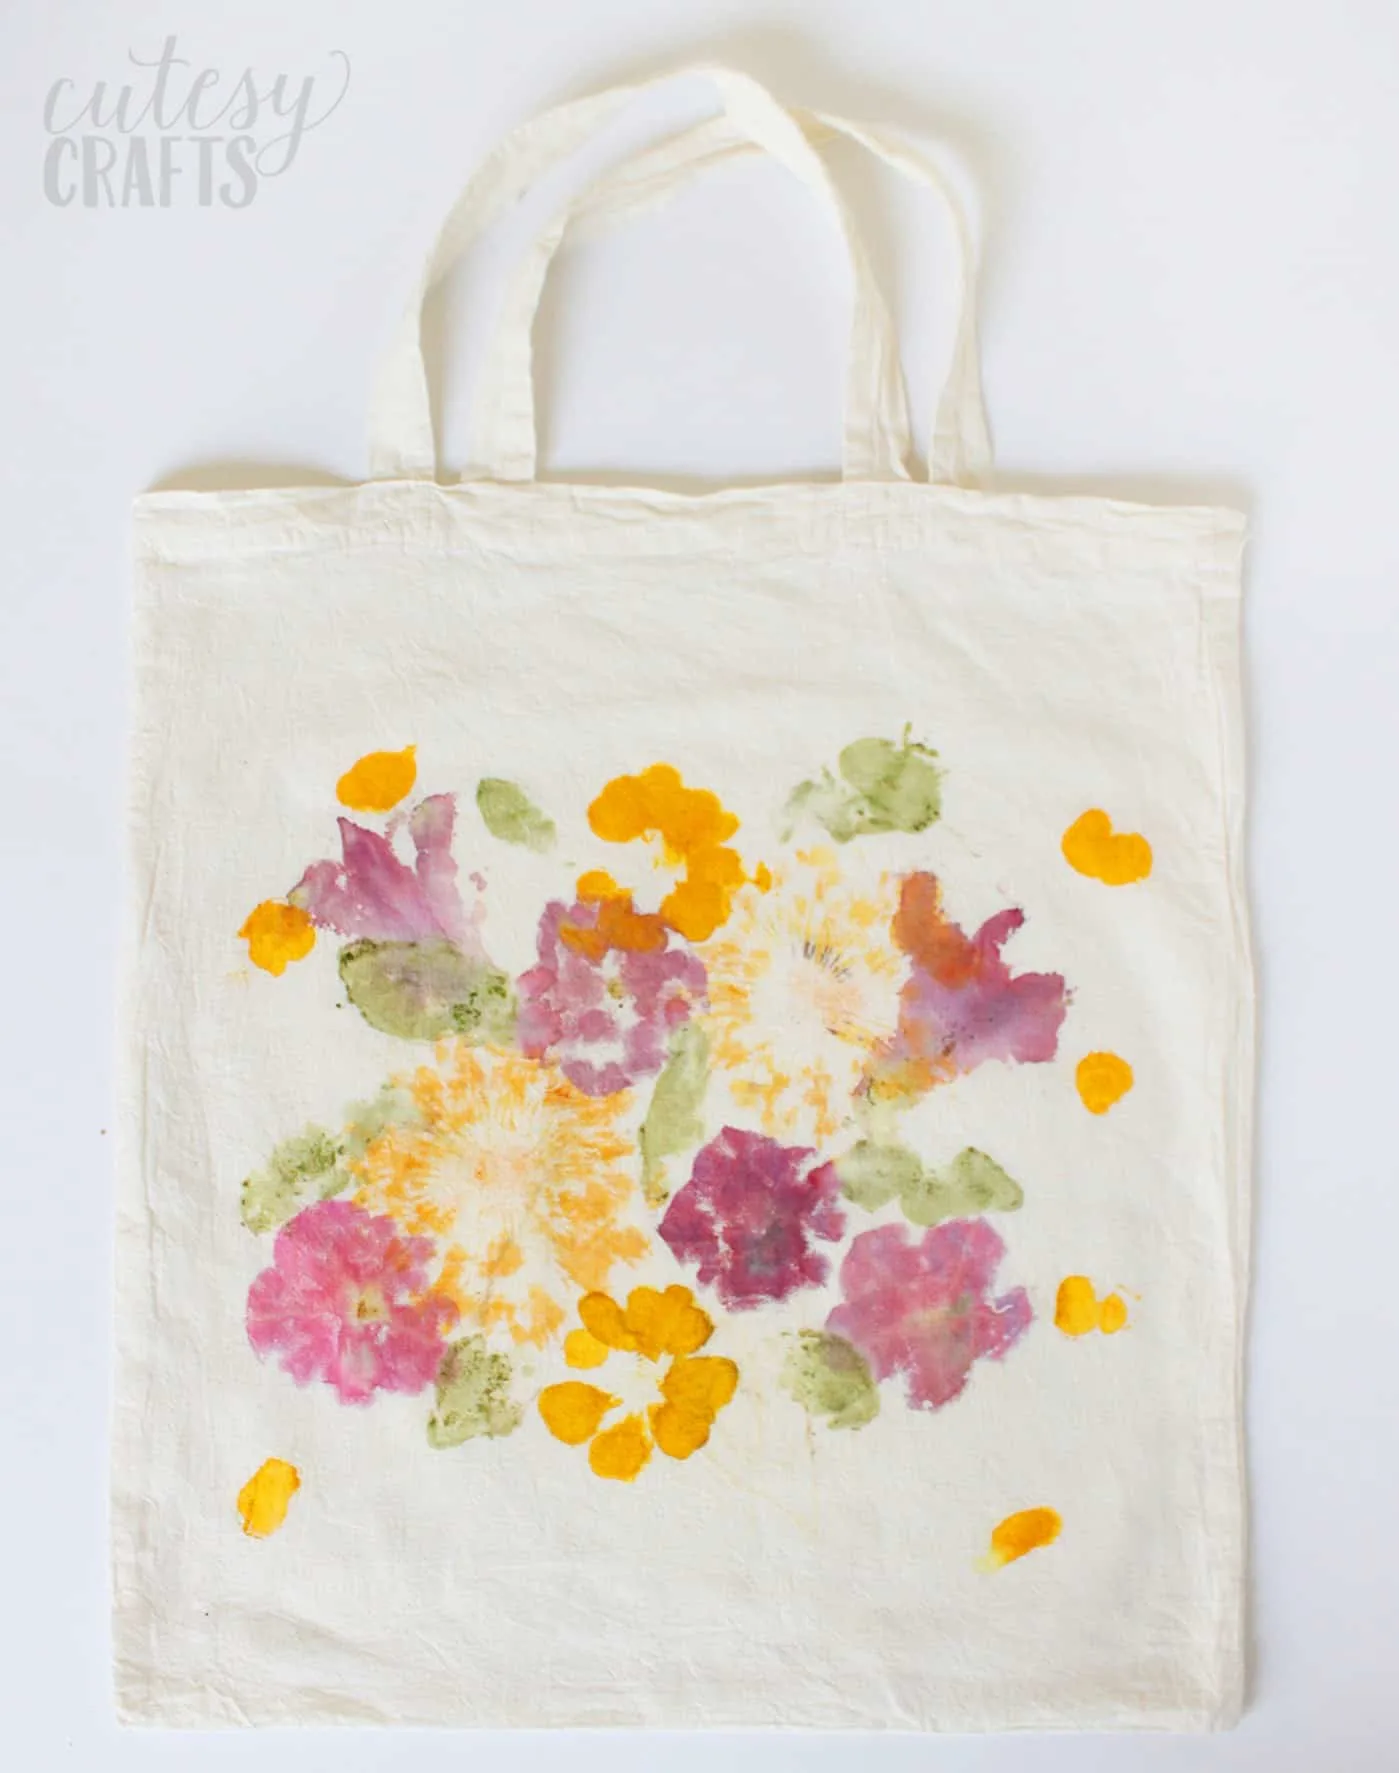 Decorate a bag with flower pounding